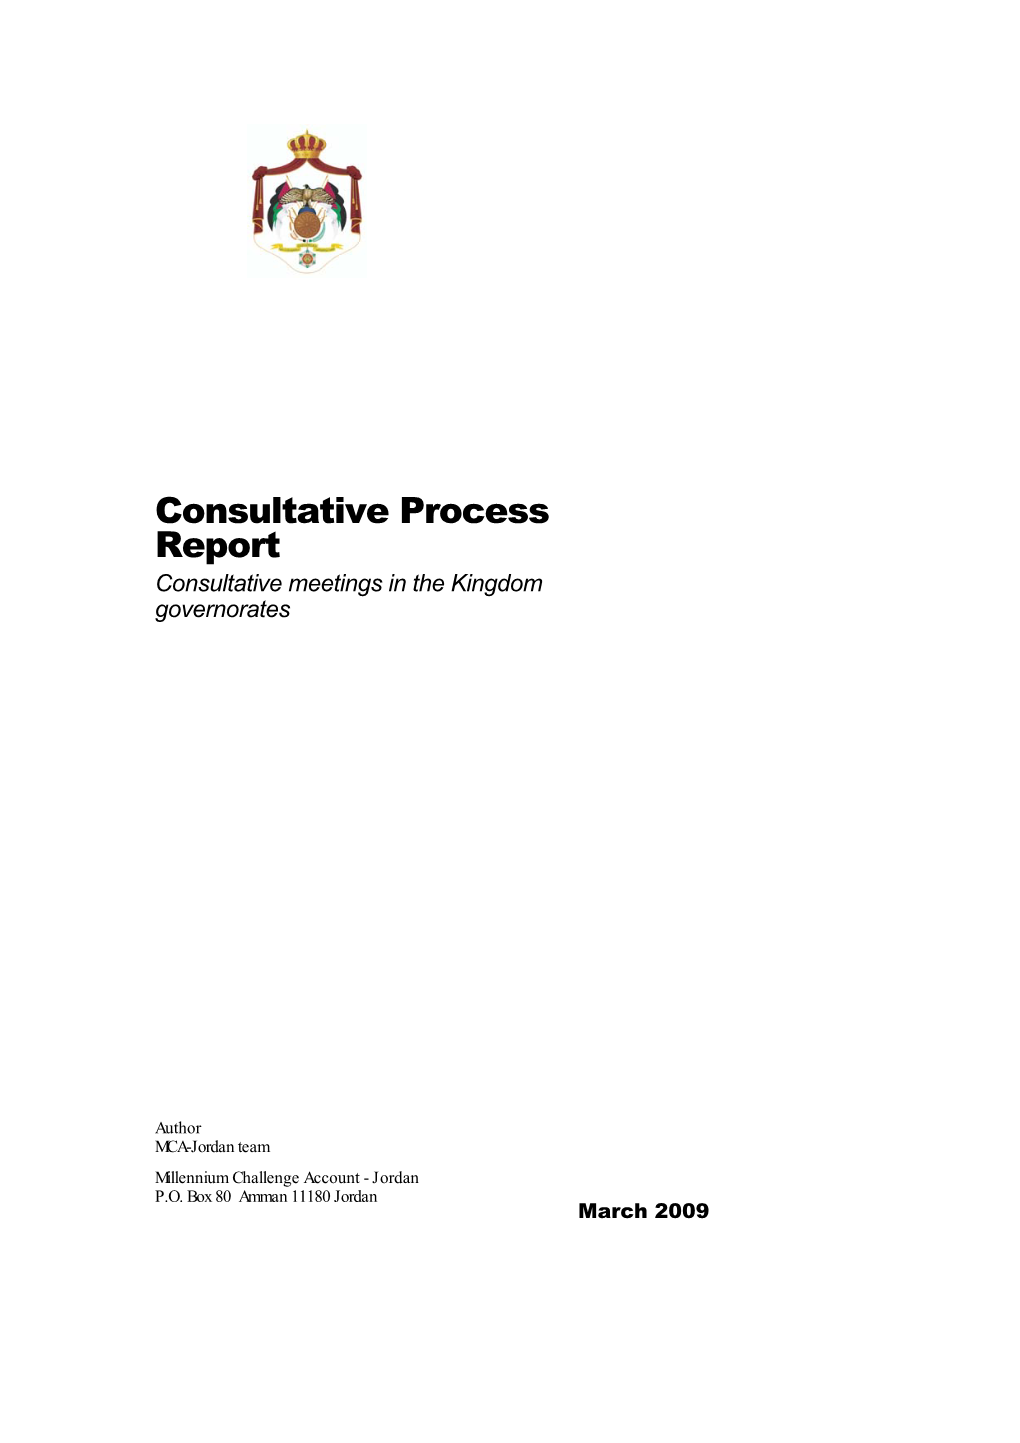 Consultative Process Report Consultative Meetings in the Kingdom Governorates